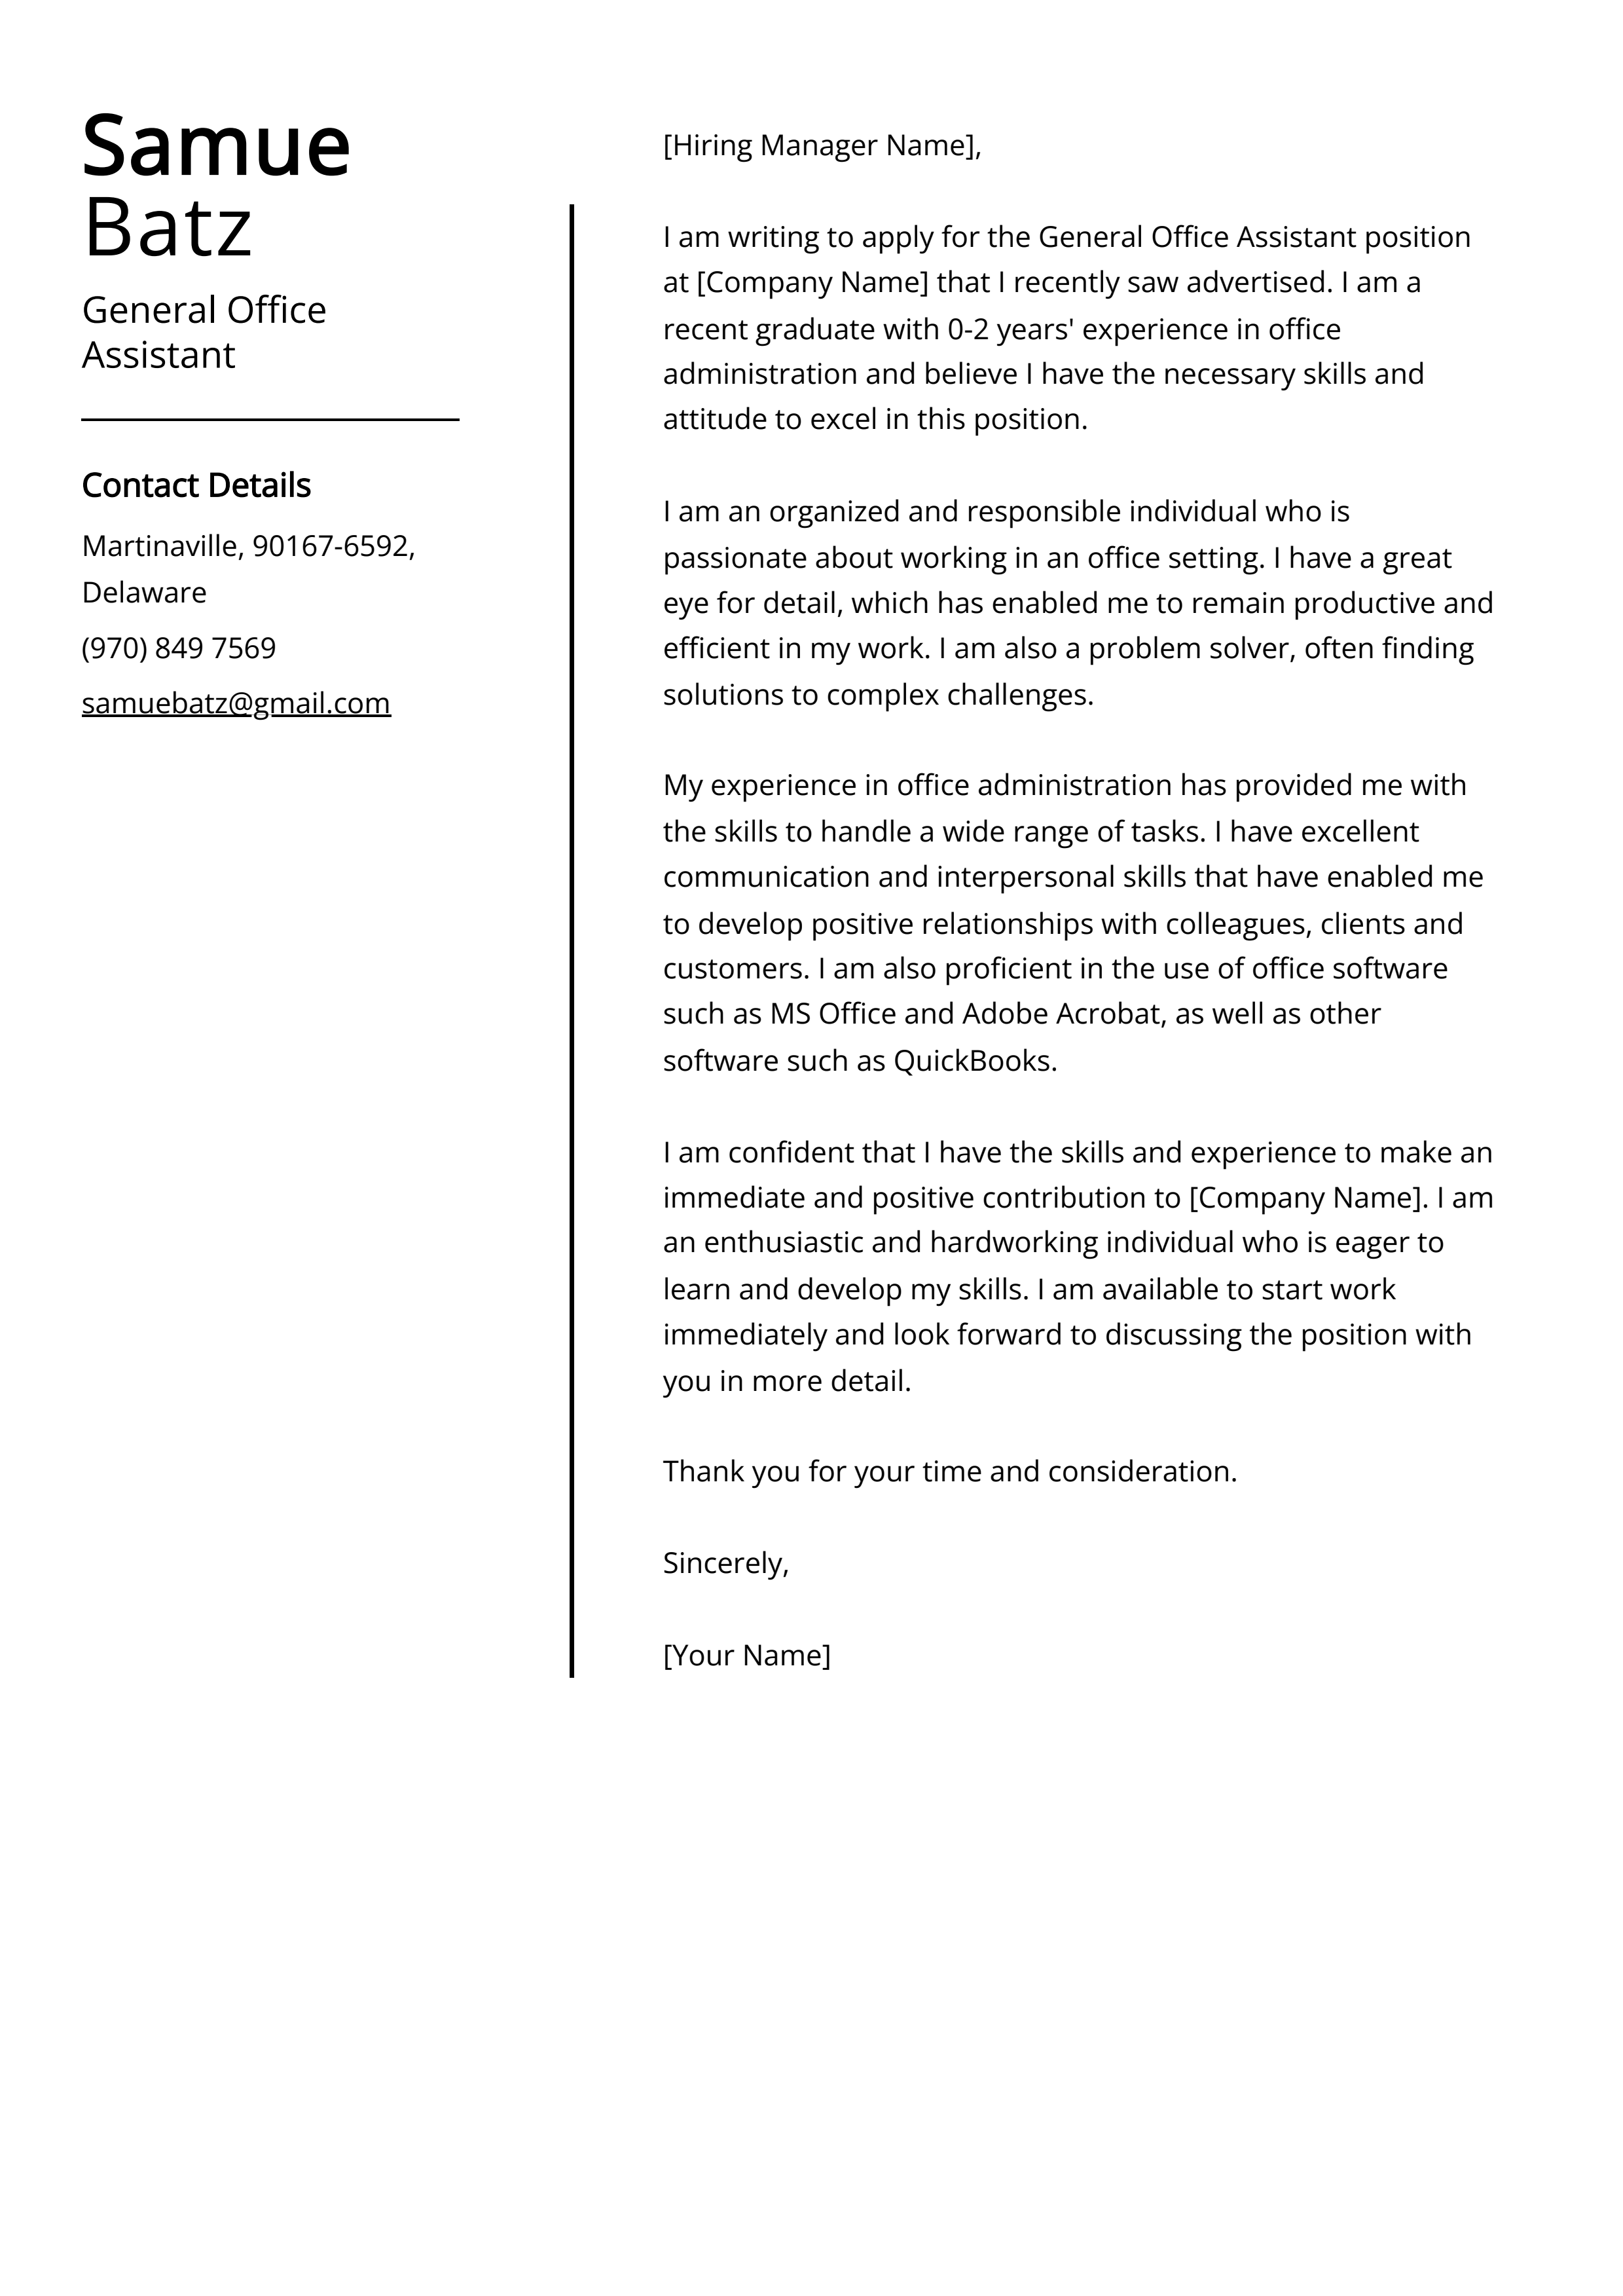 General Office Assistant Cover Letter Example